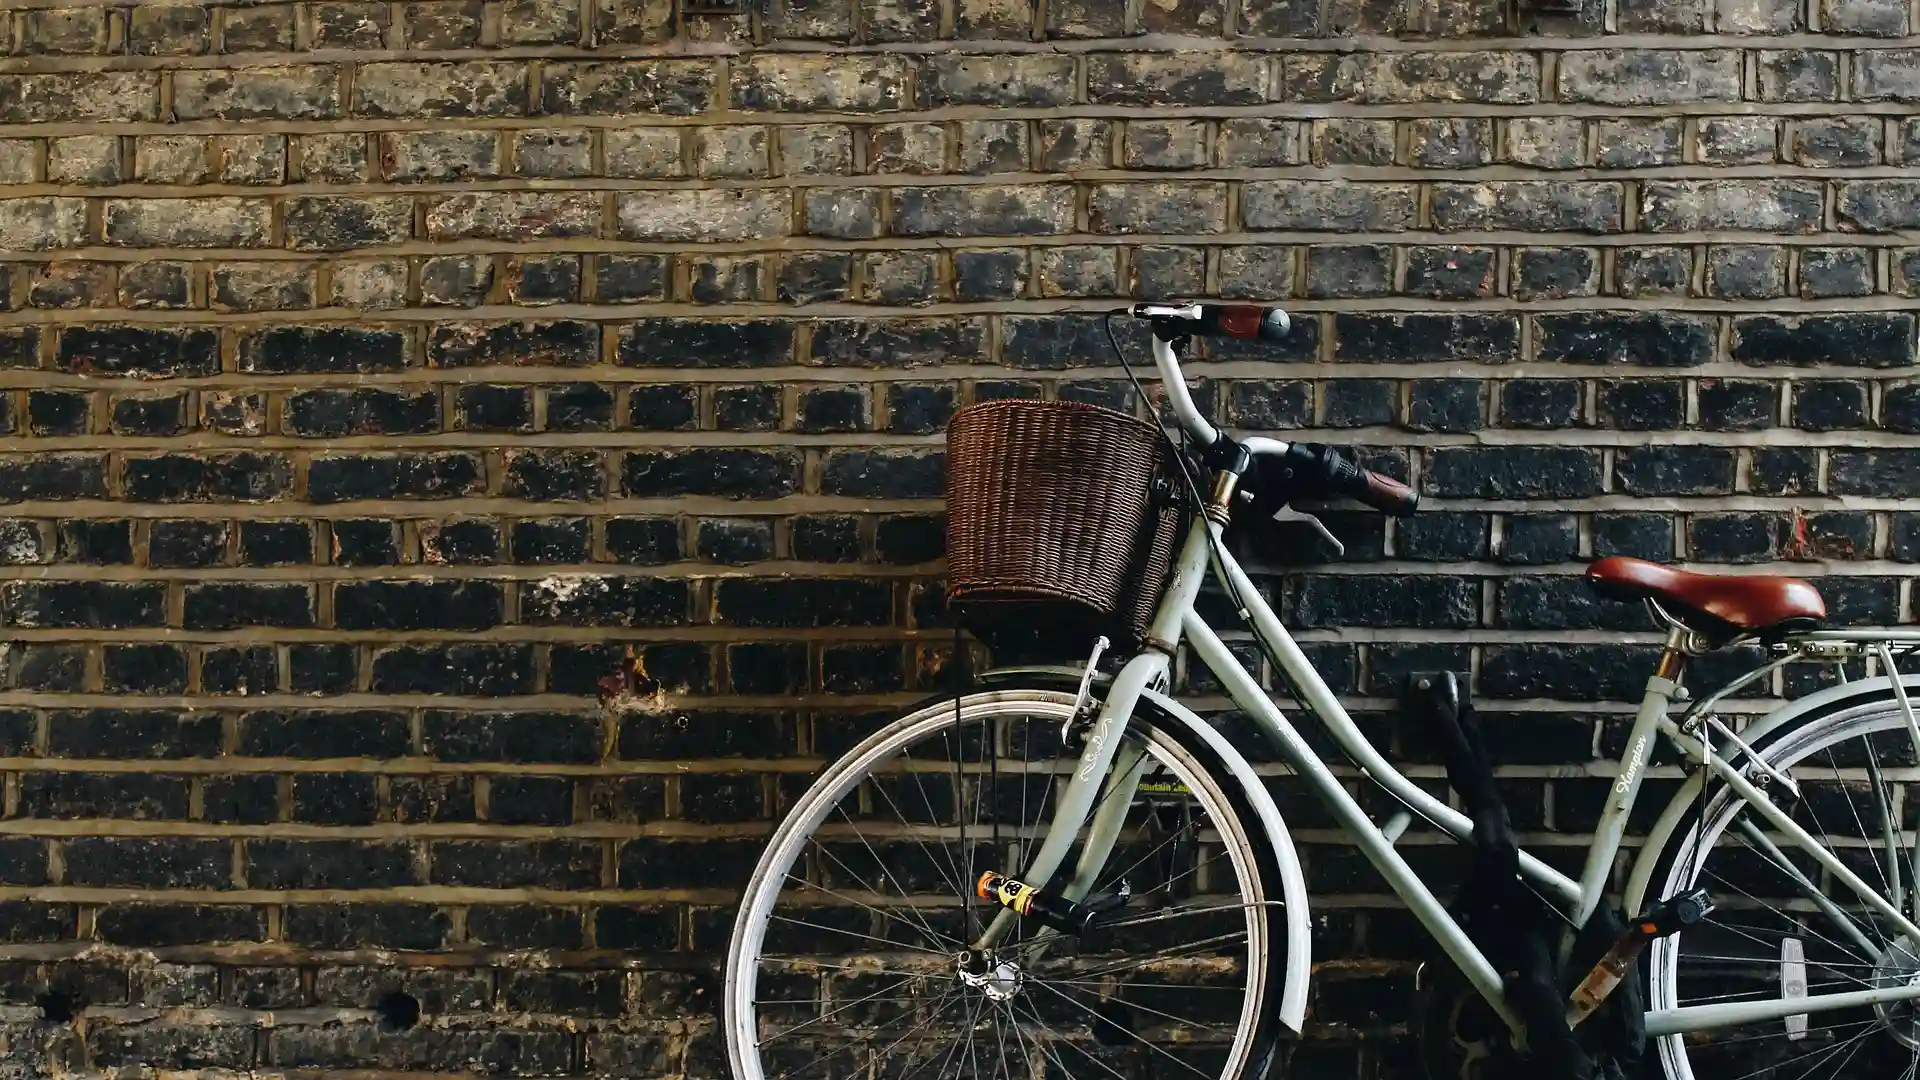 In the picture, a bike resting against a wall of black bricks.